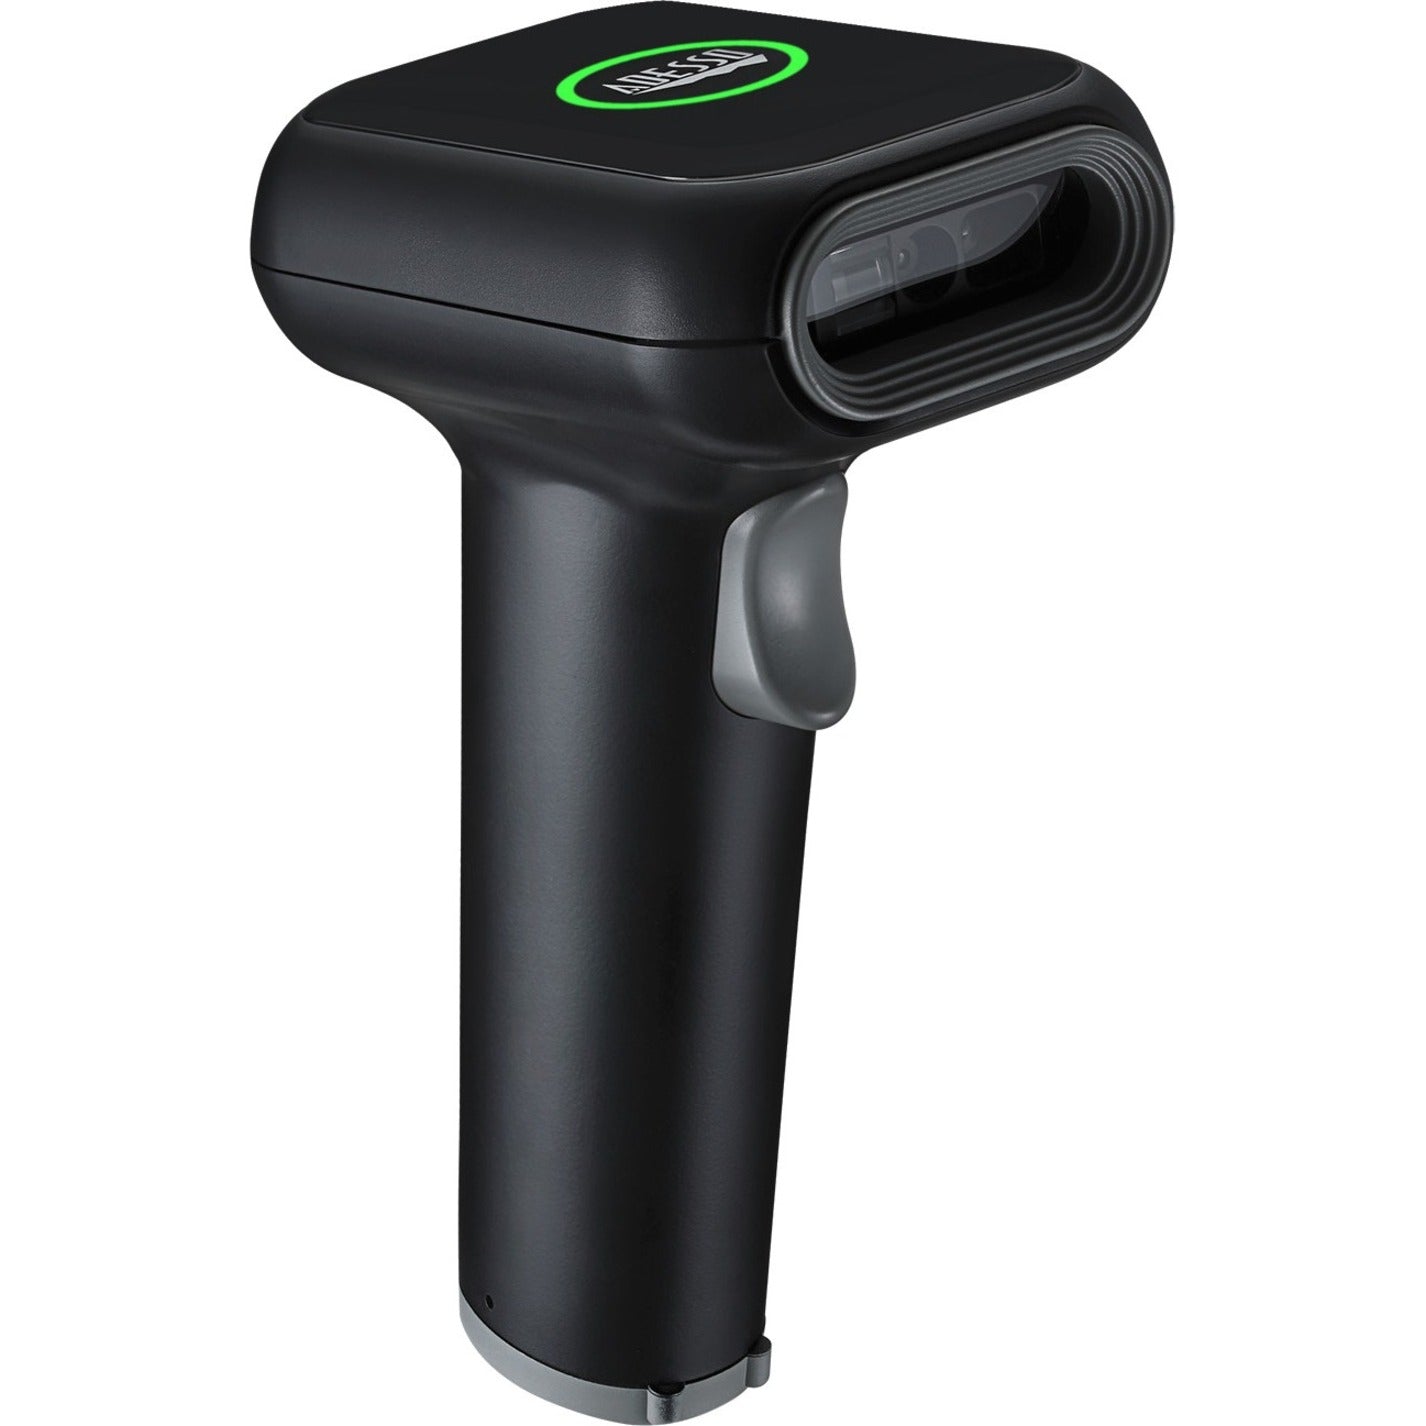 Adesso NUSCAN2700R NuScan 2700R 2D Wireless Barcode Scanner with Charging Cradle, Handheld, USB, Wireless, IP54